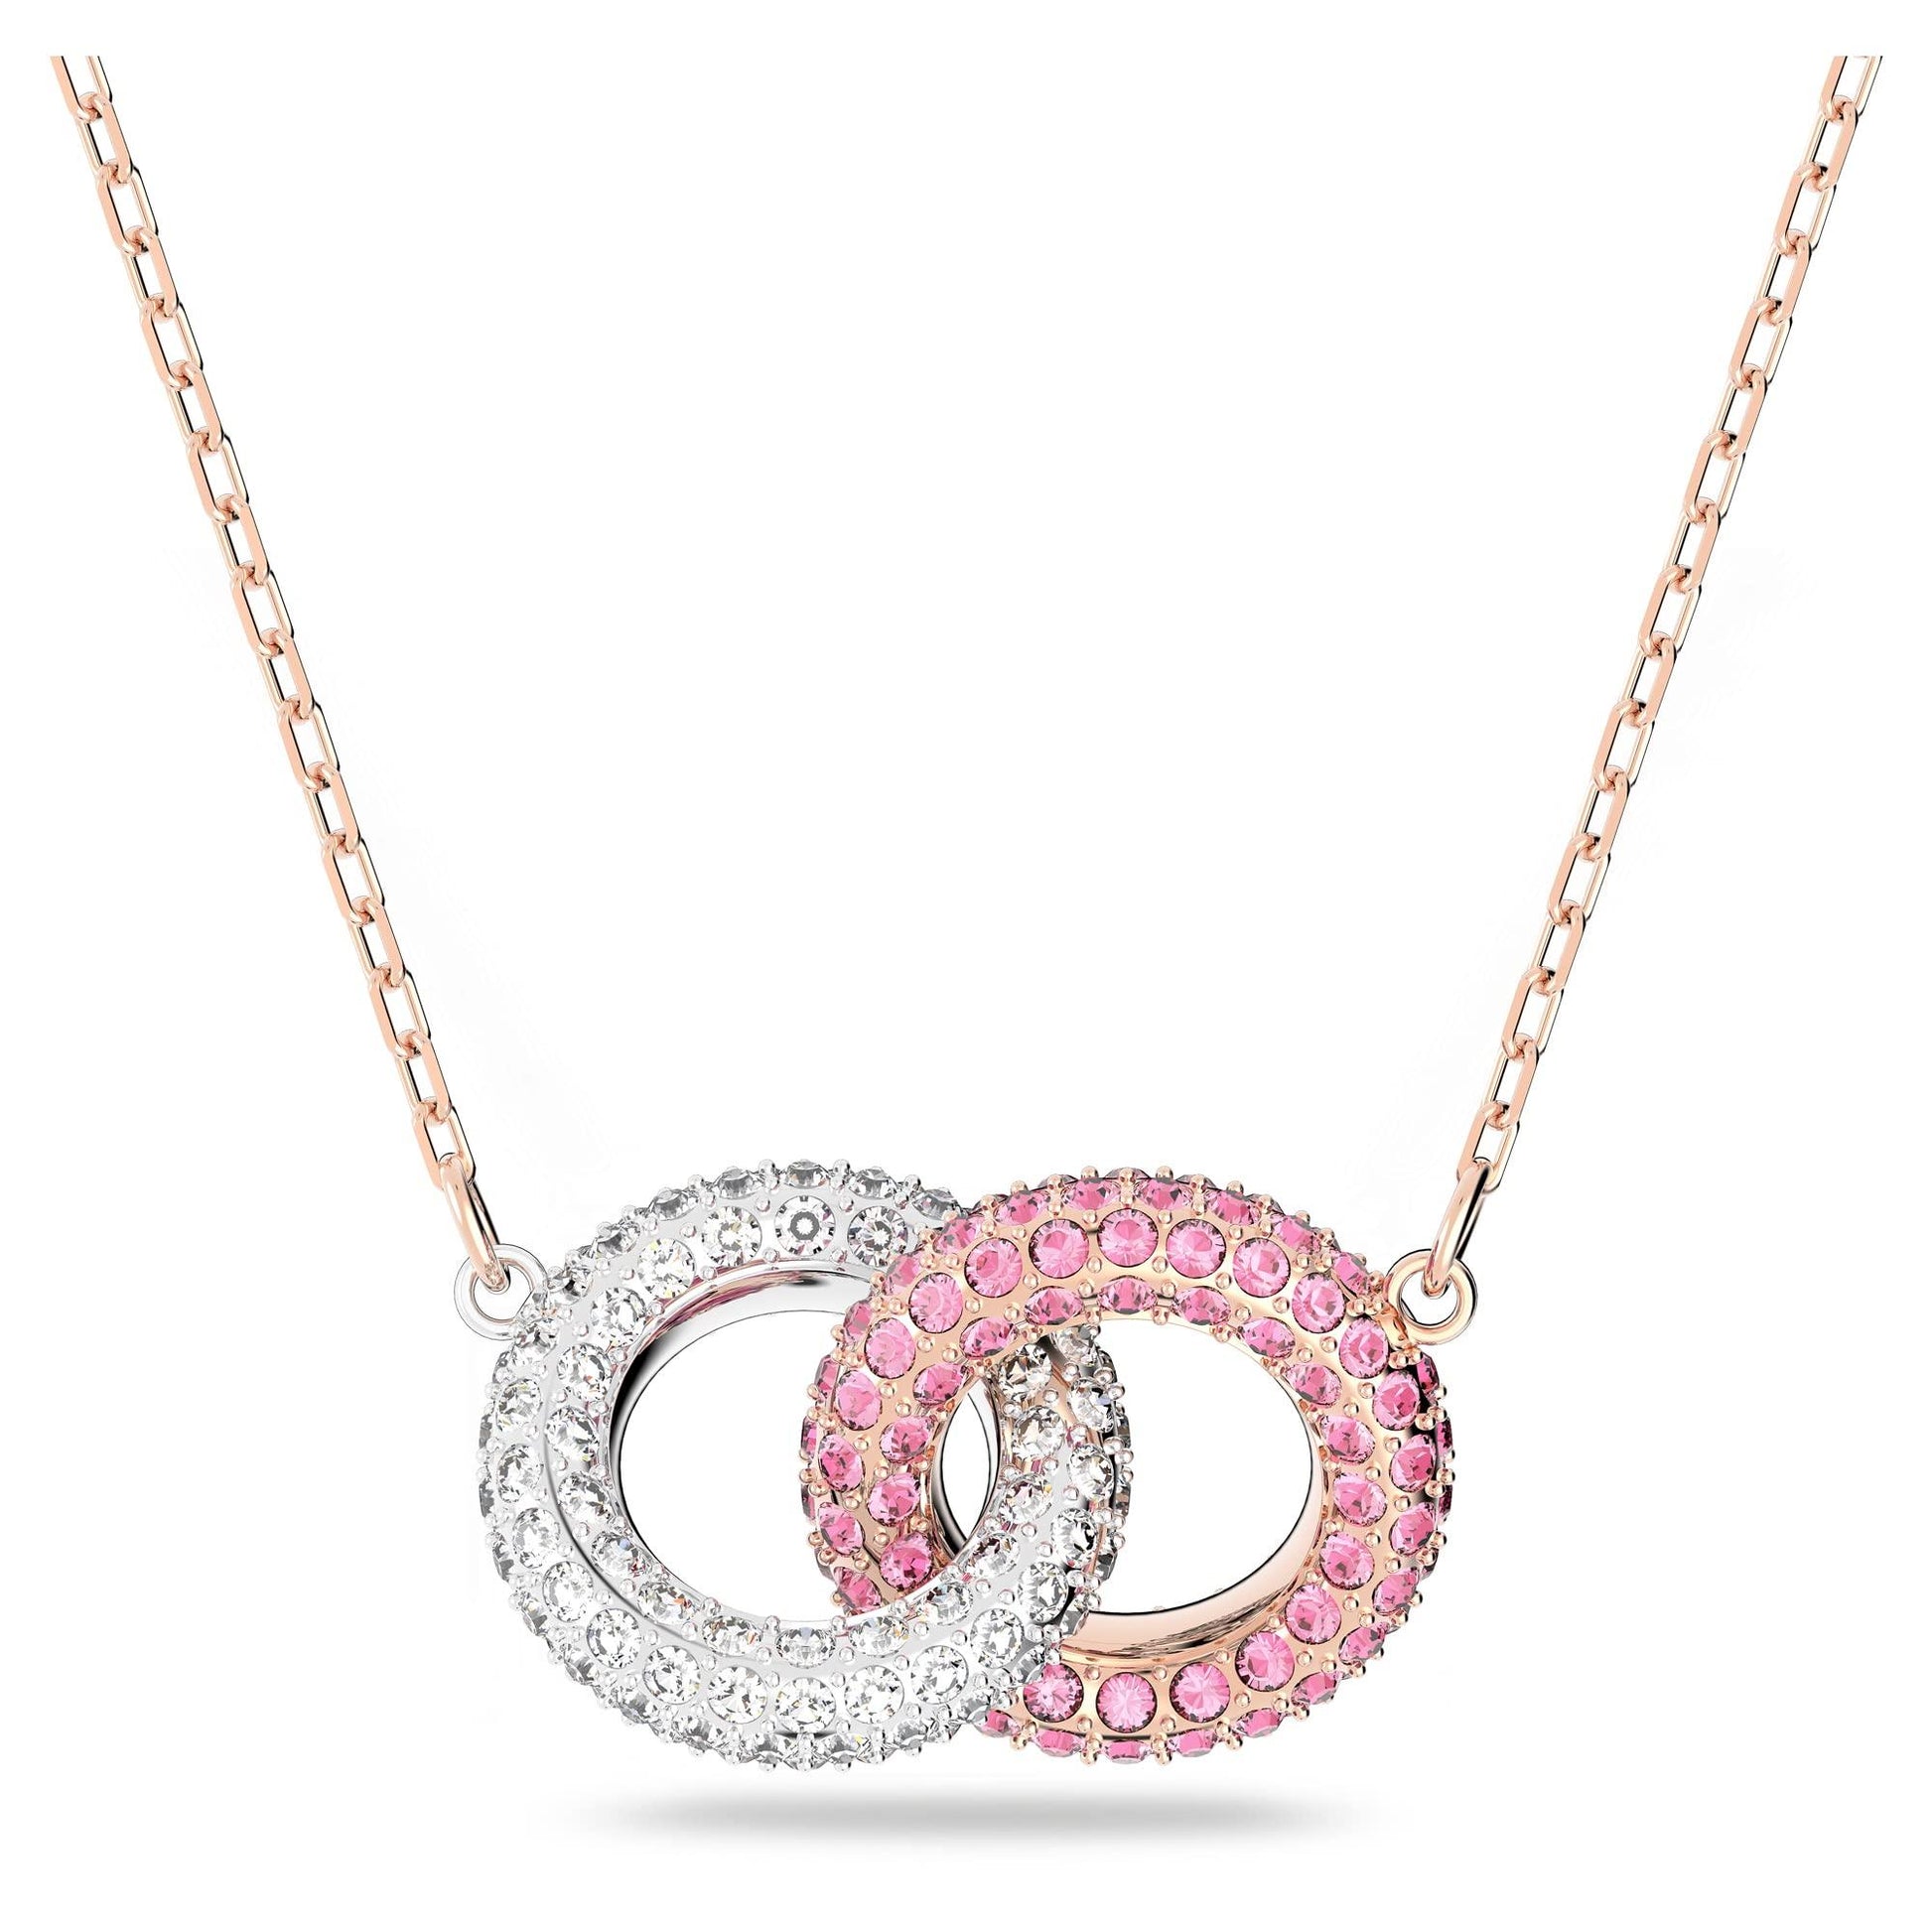 Swarovski Stone Pendant Necklace with Interlocking Circle Design, Pink and White Crystals on Rose Gold-Tone Finish Chain, Part of the Swarovski Stone Collection